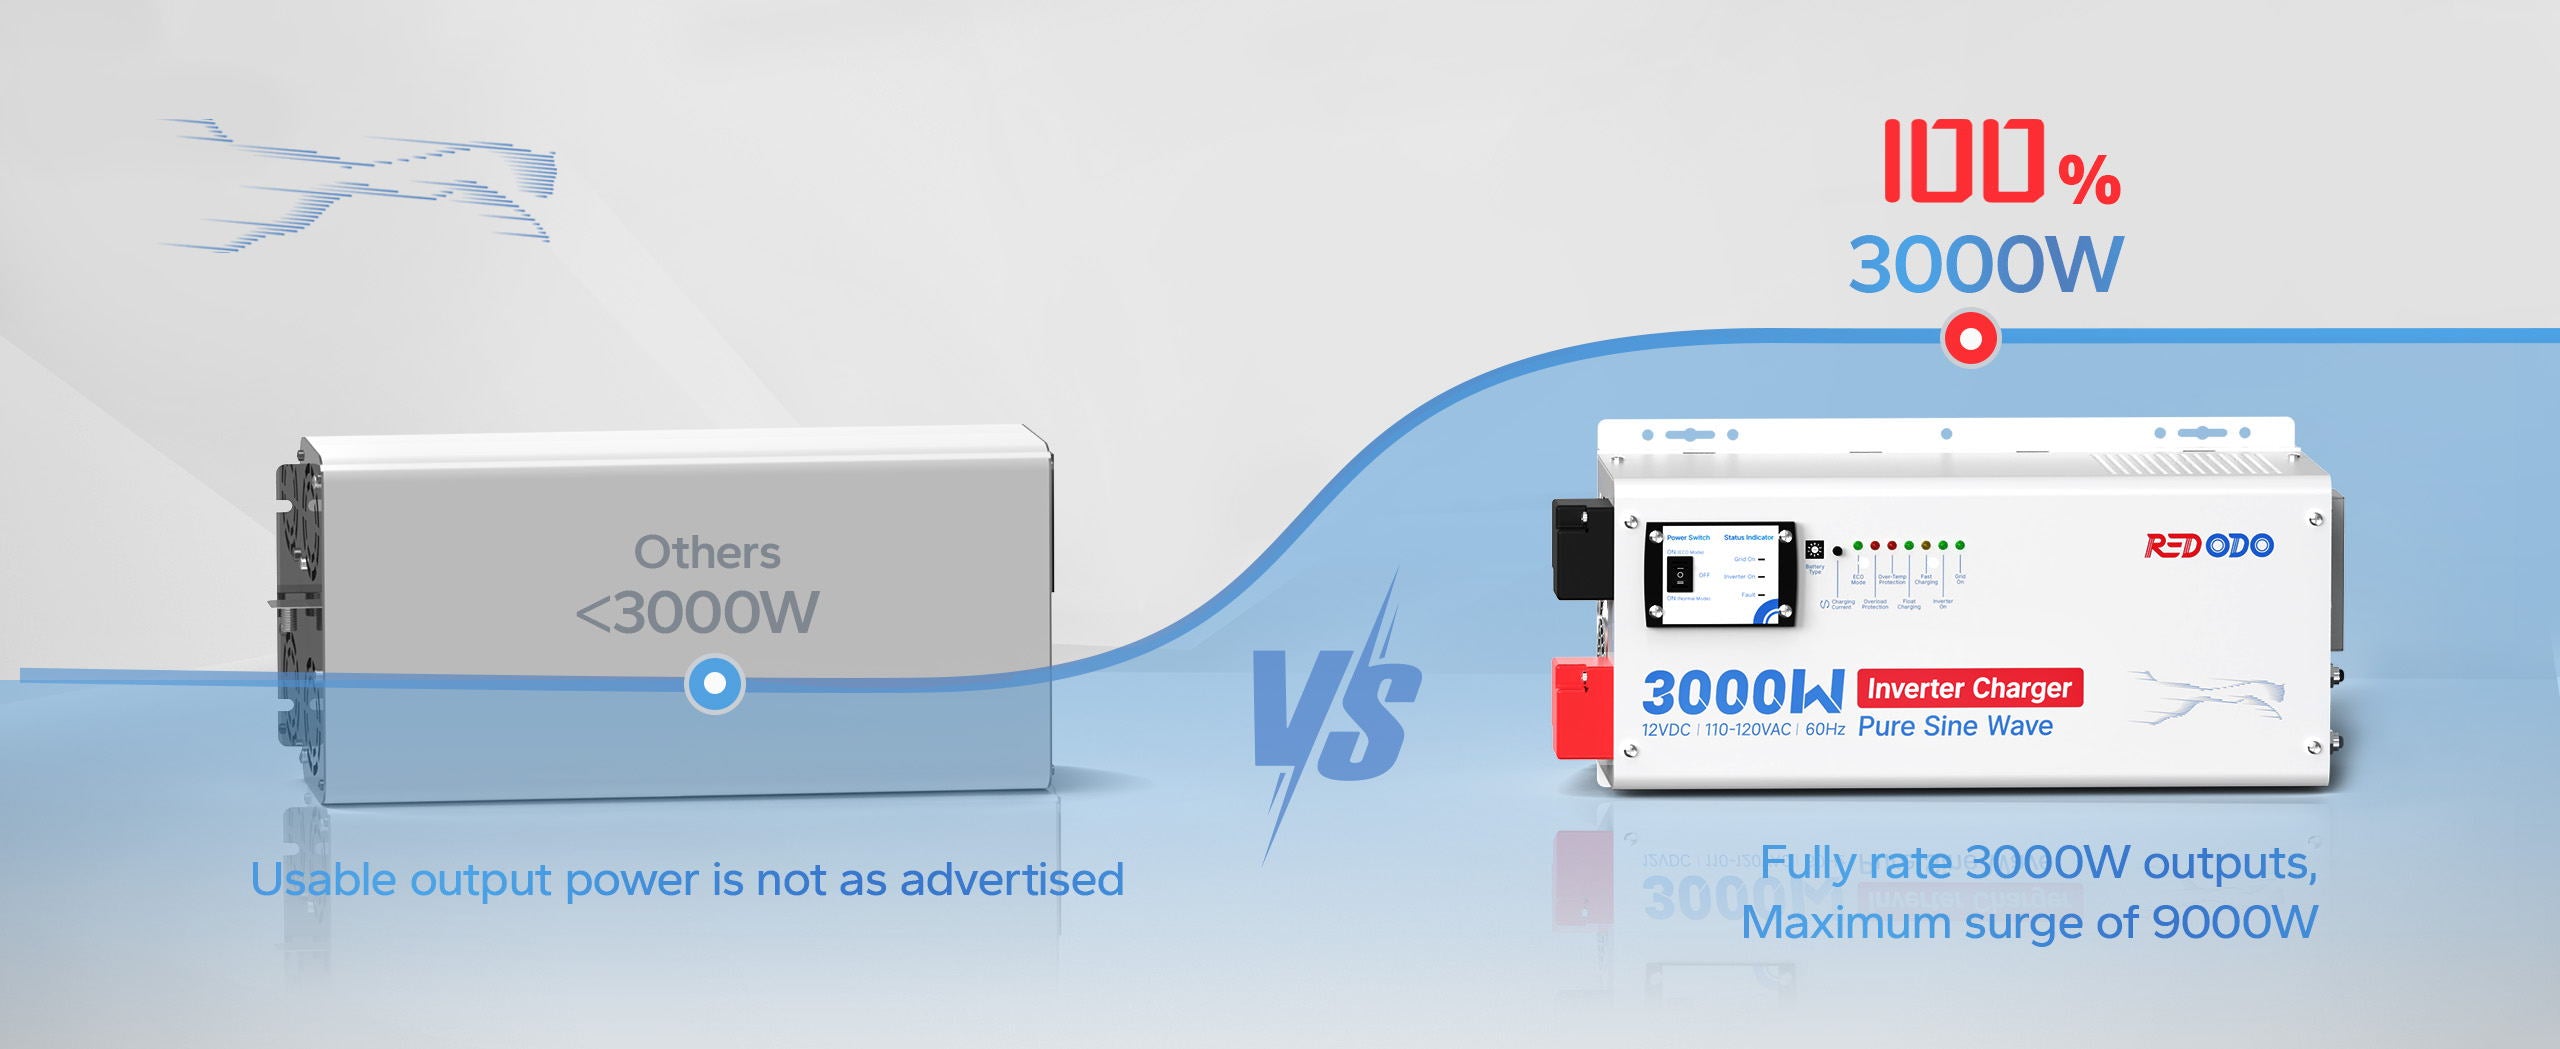 Redodo 3000W all-in-one inverter-charger is compatible with a wide range of battery types